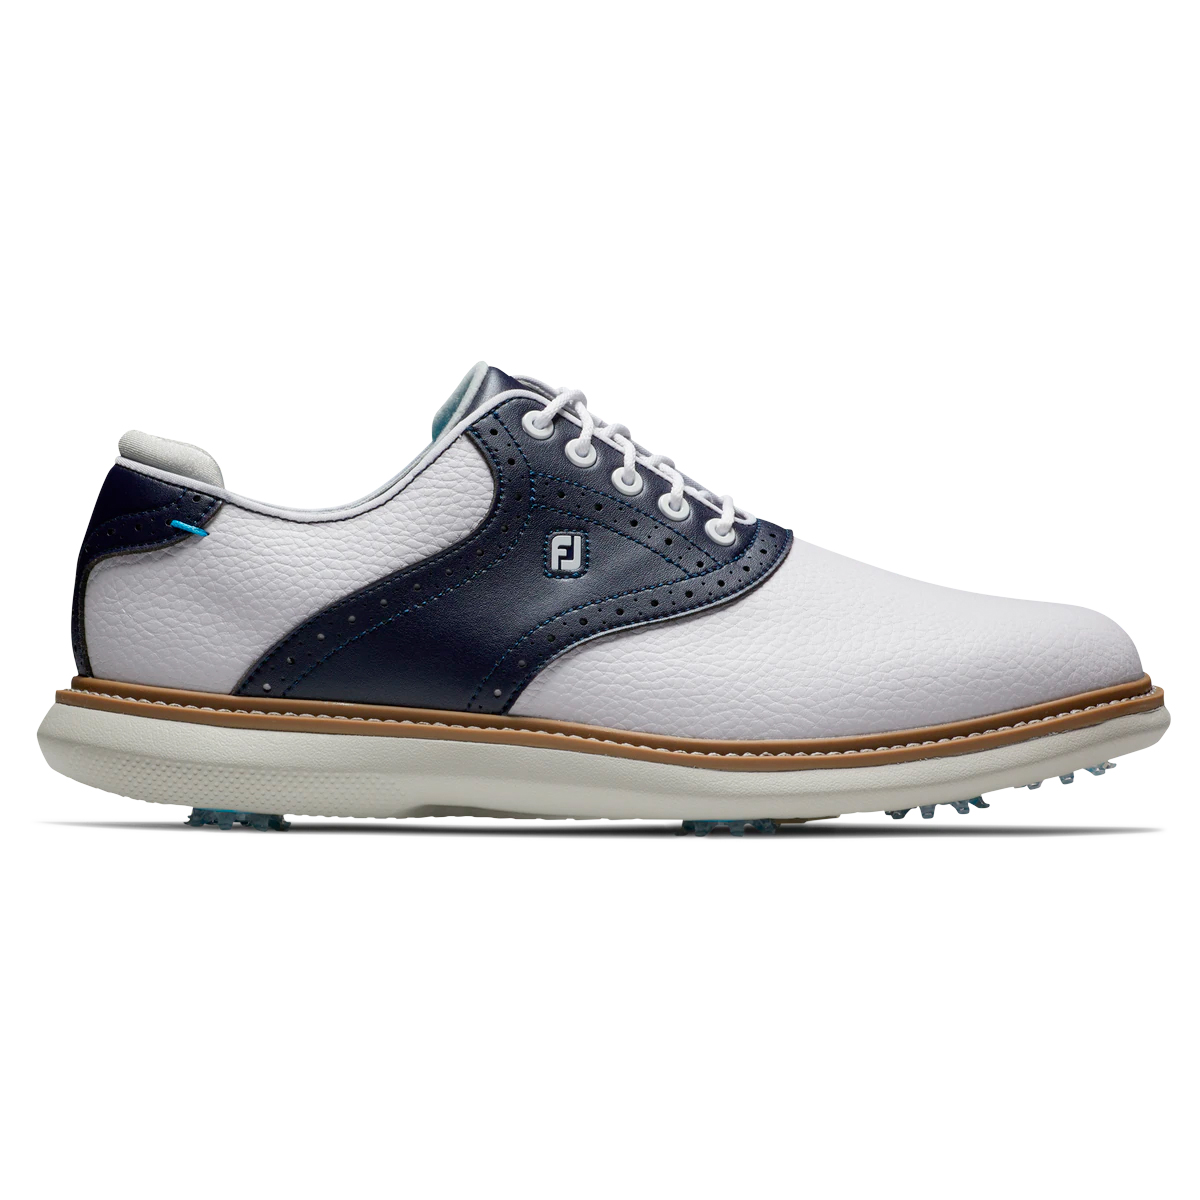 FootJoy Traditions SP 23 Mens Golf Shoes  - White/Navy